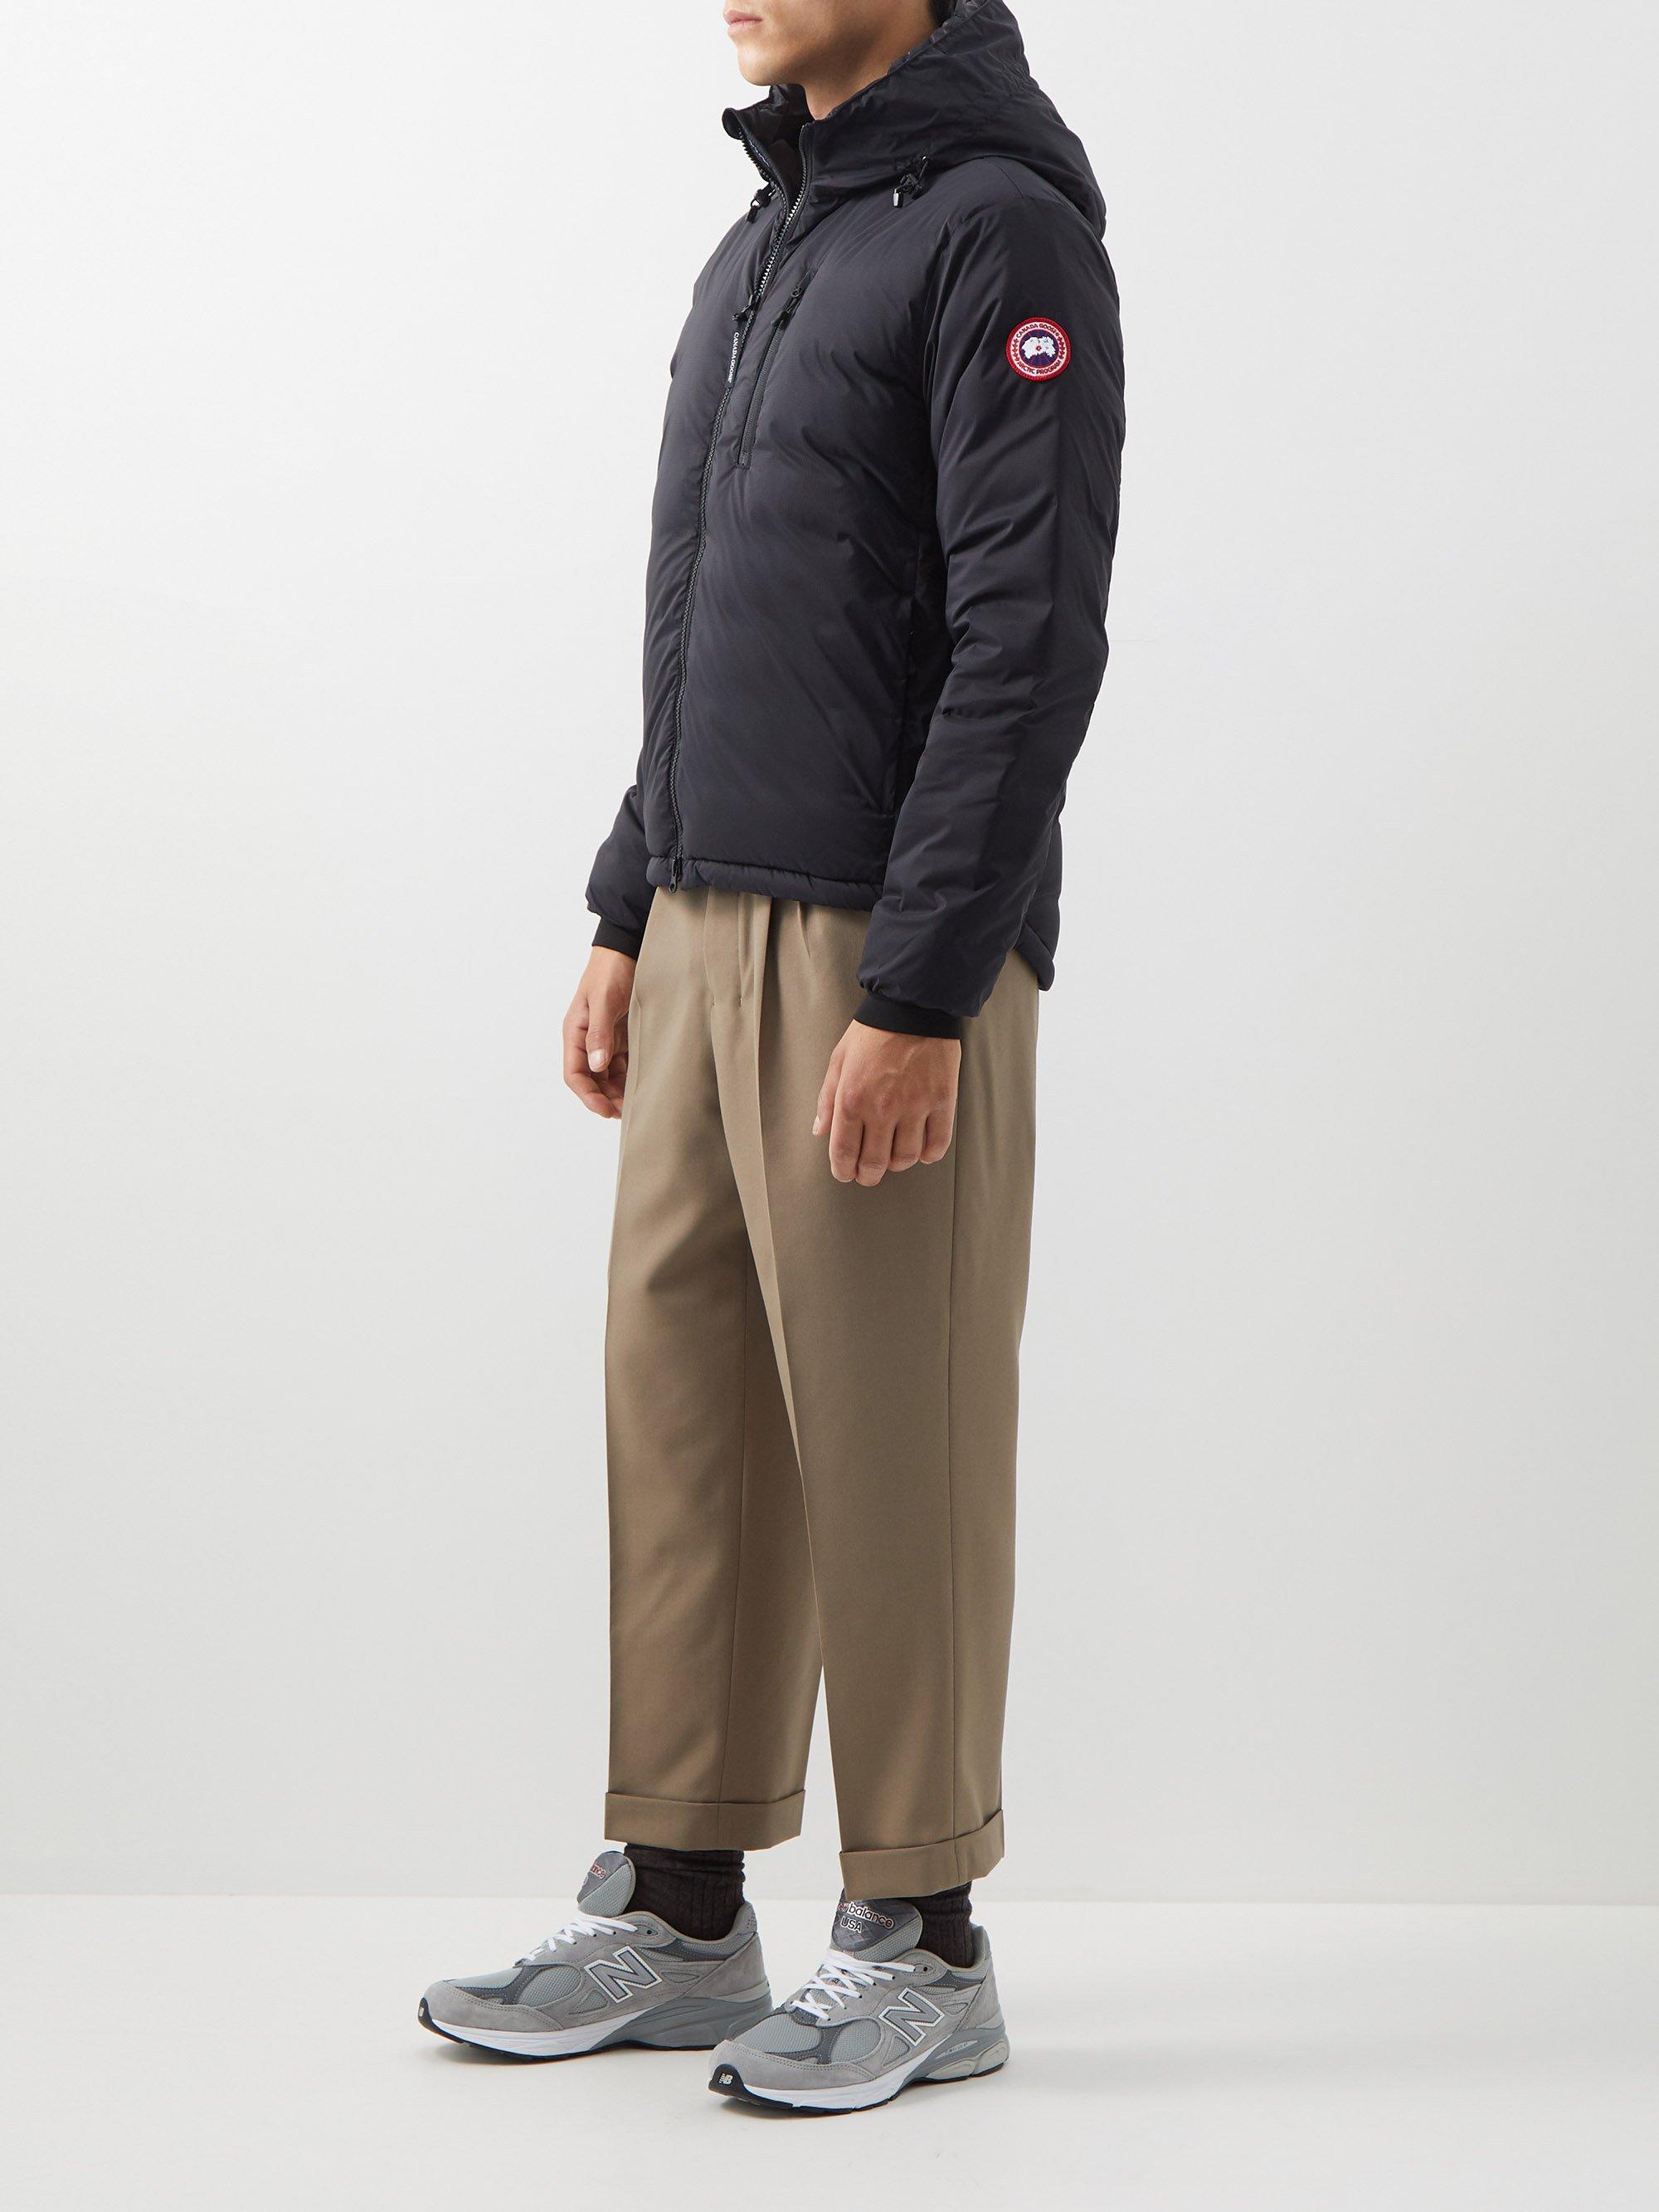 Canada Goose Lodge Packable Down Jacket in Black for Men | Lyst